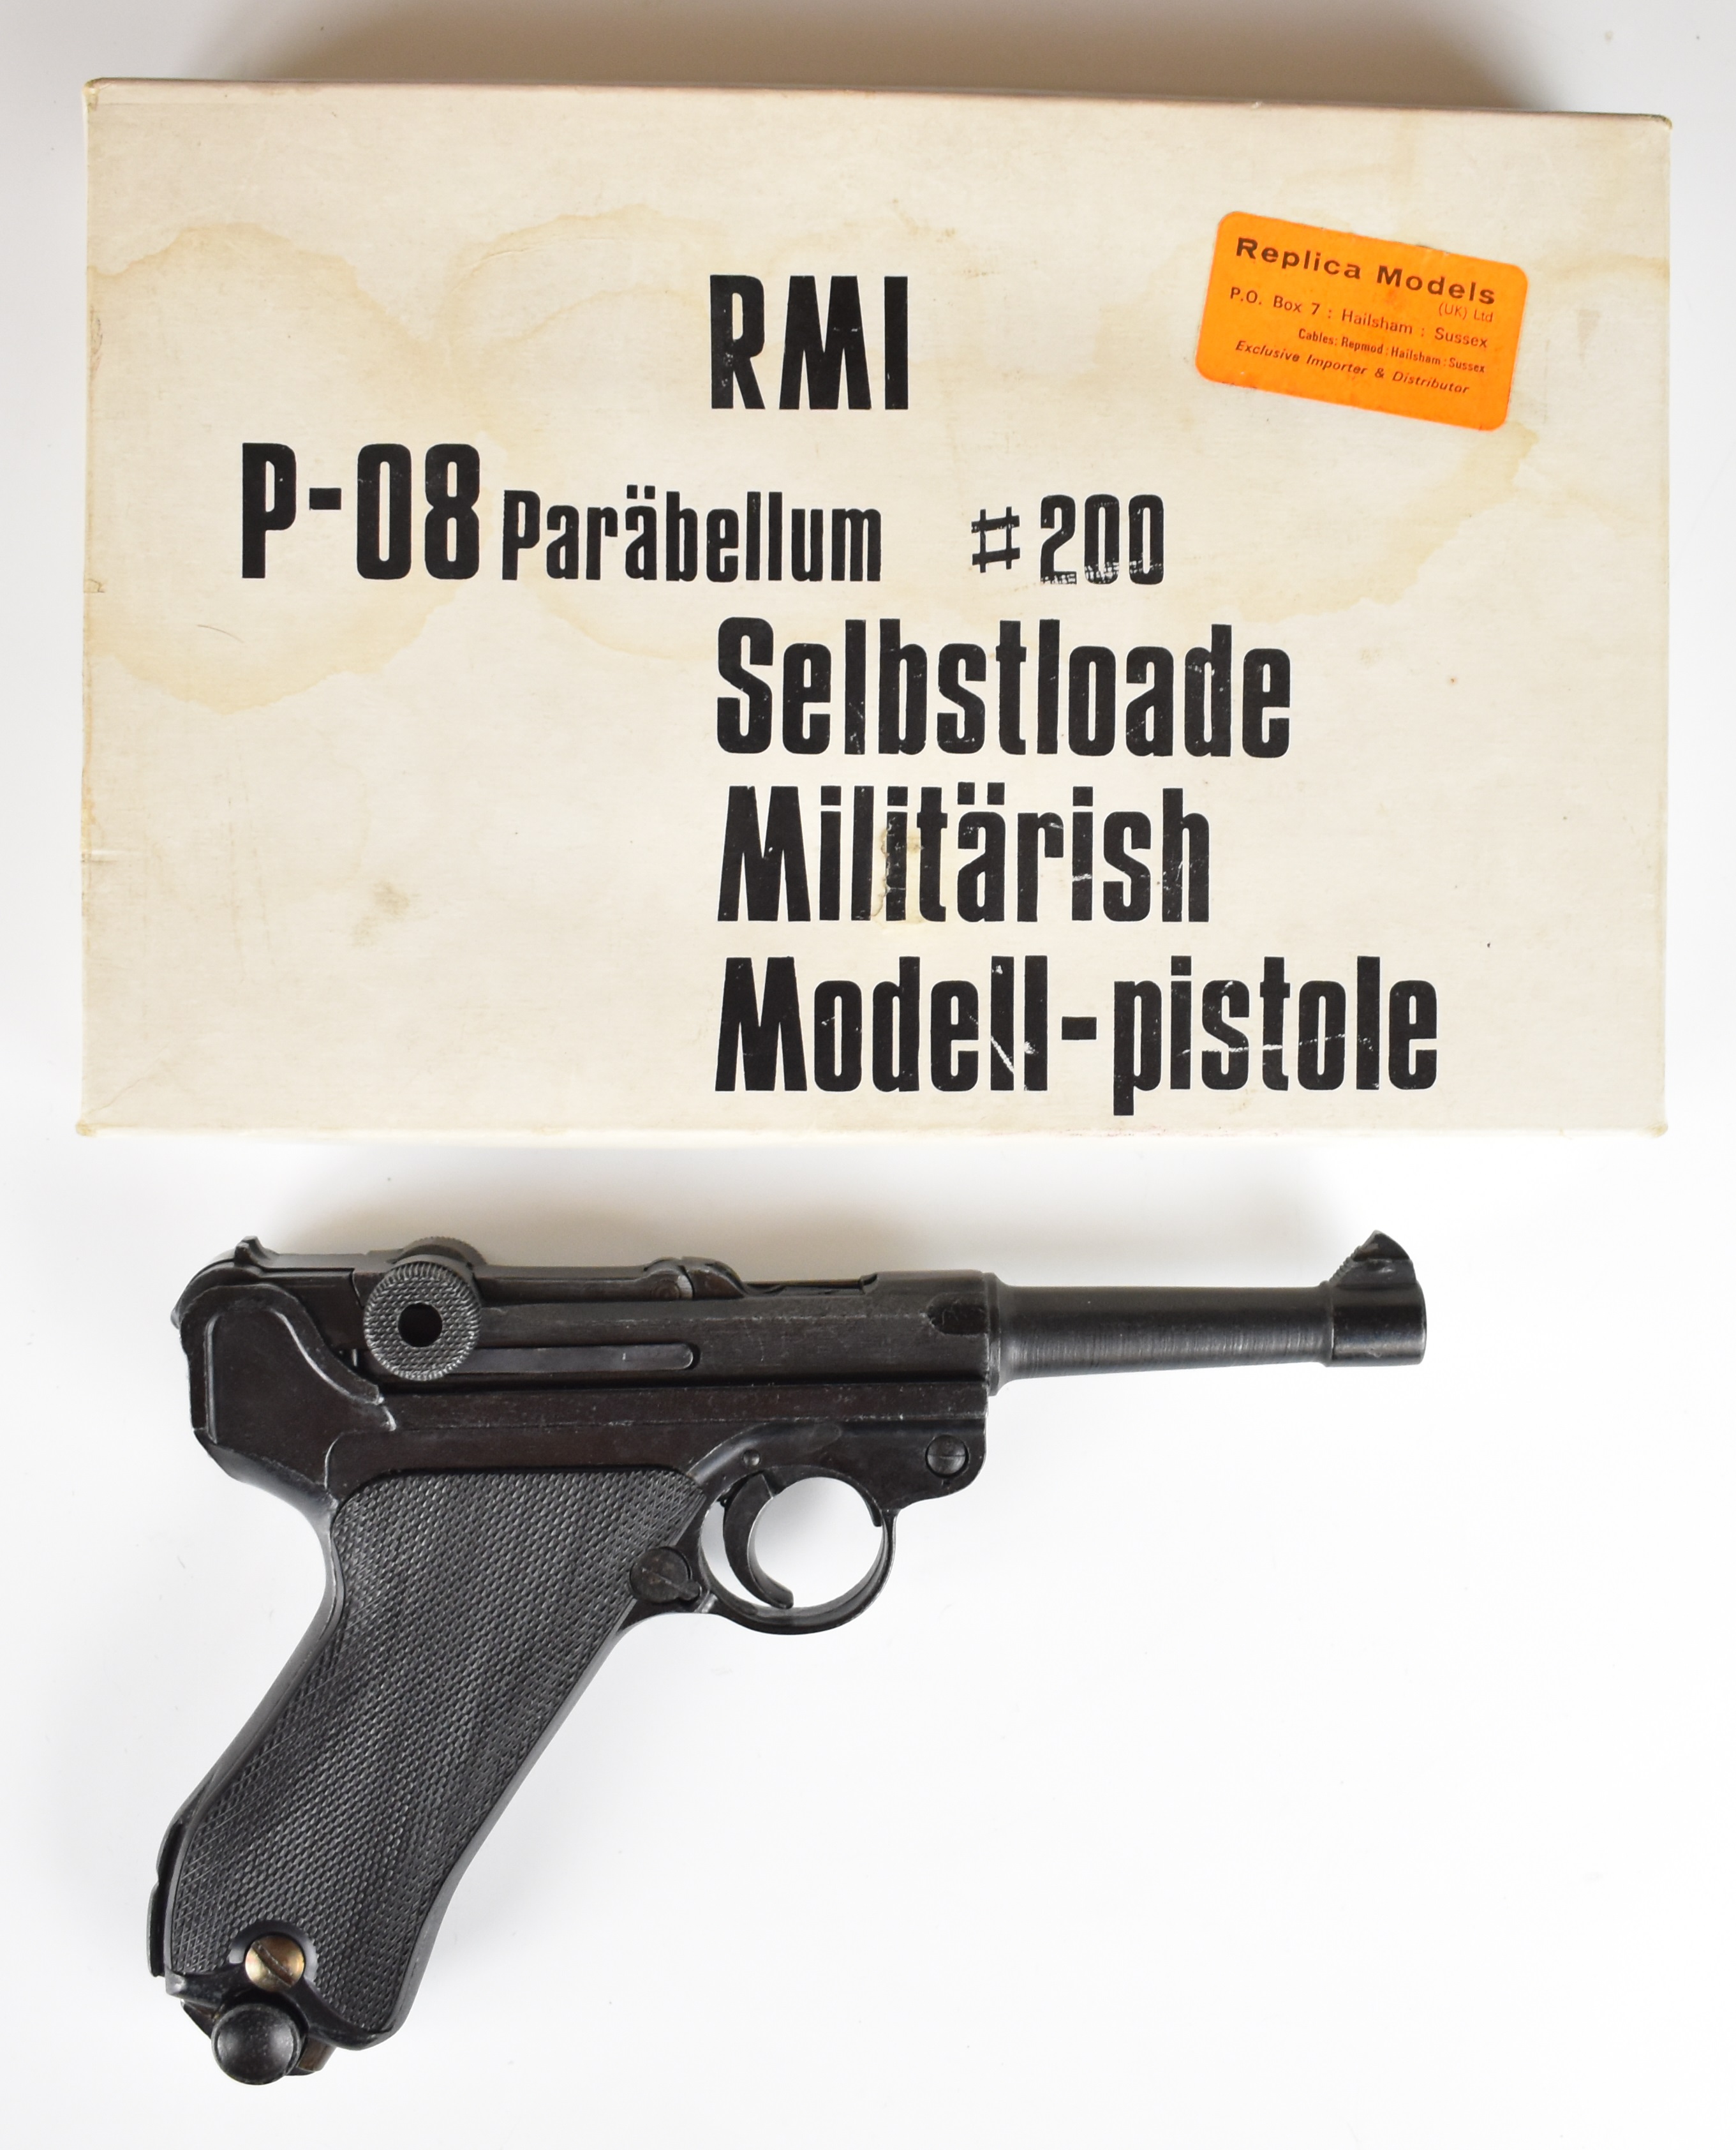 RMI P-08 Parabellum Selbstloade Militarish Luger pistol with chequered grips and dummy rounds, in - Image 13 of 24